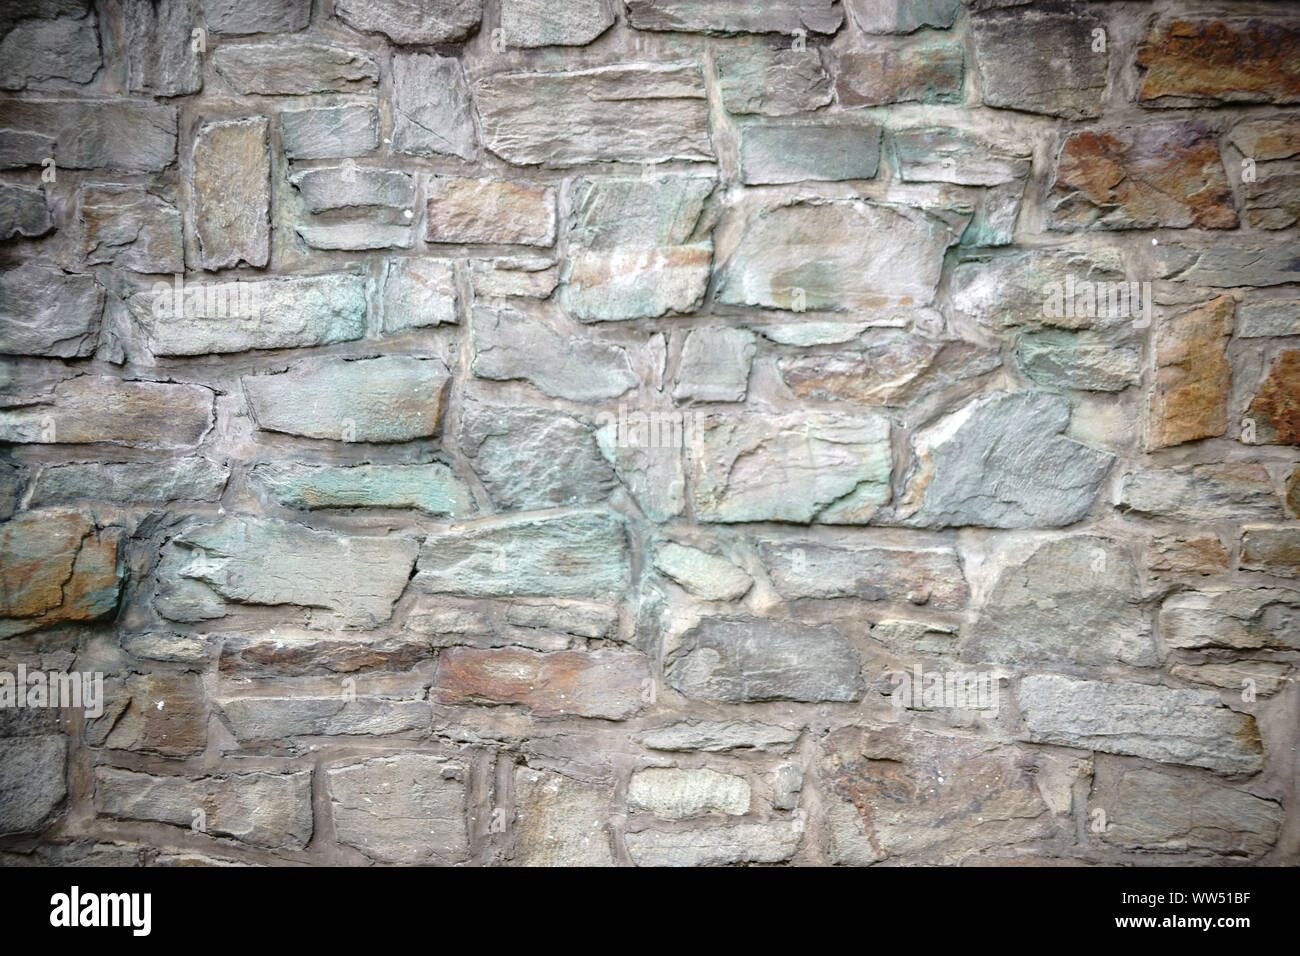 A striking wall with differently coloured and corroding stones, Stock Photo